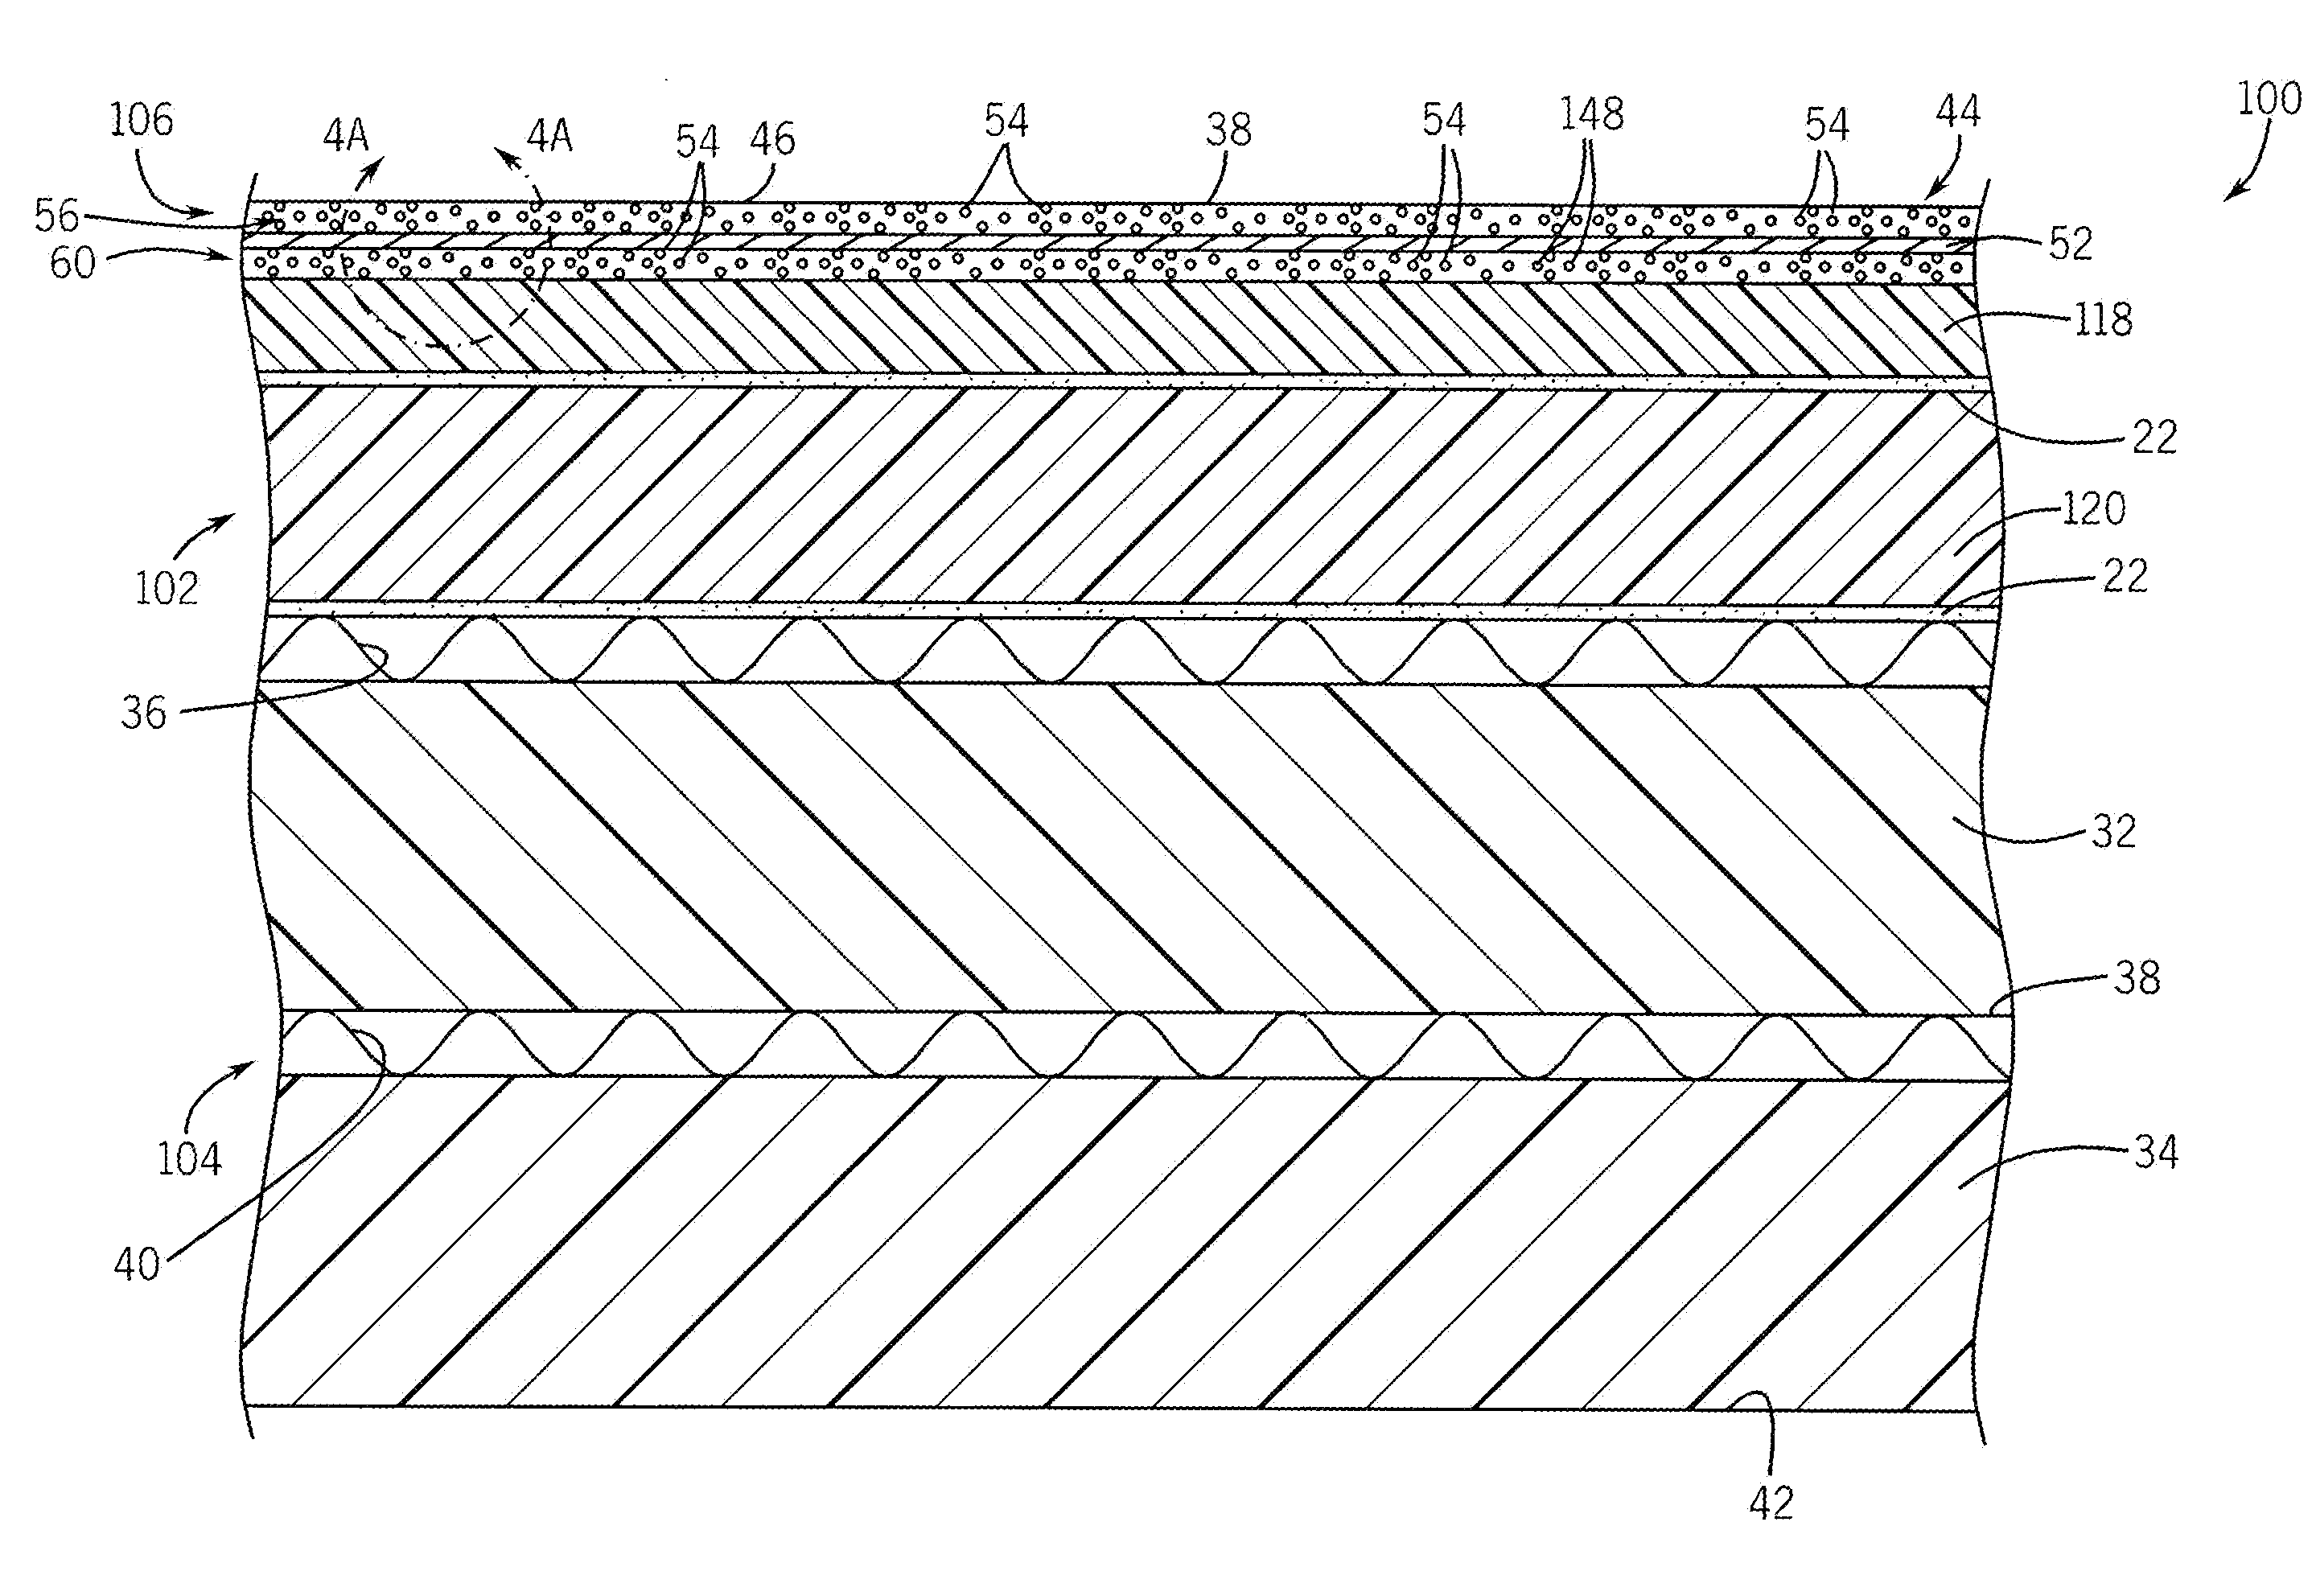 Body support cushion having multiple layers of phase change material